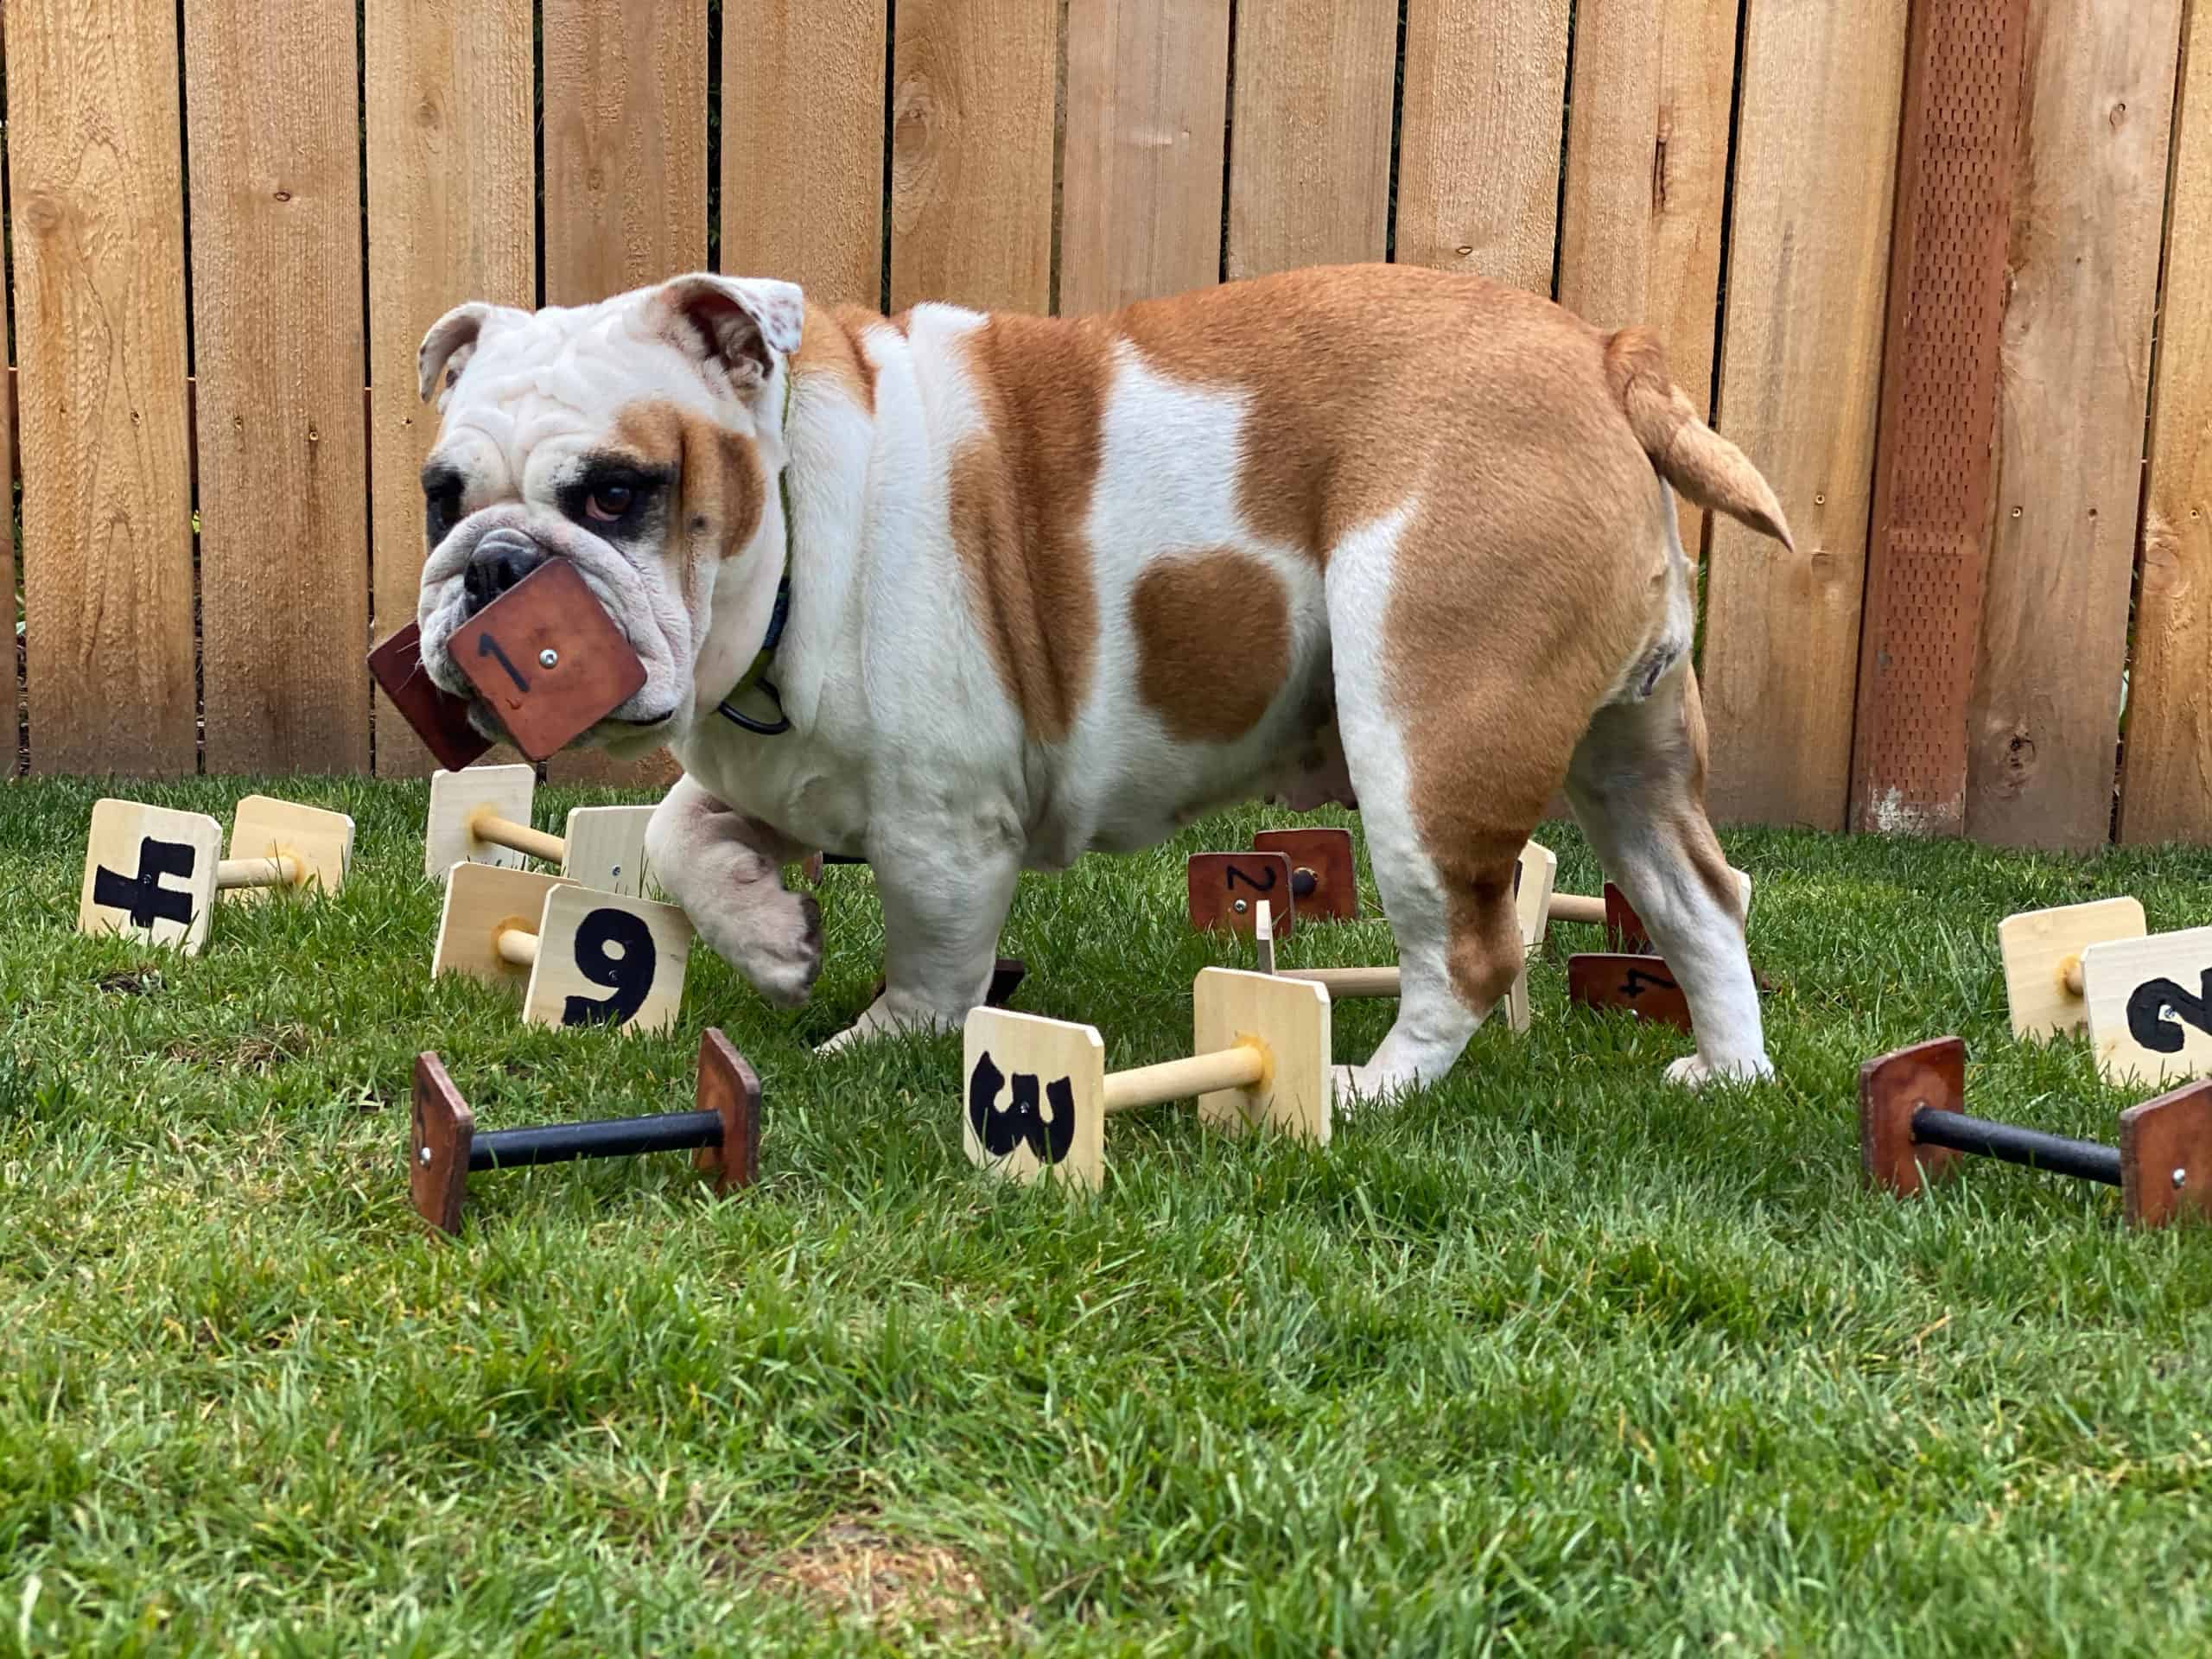 Ducky earned her UD and a place in the BCA HOF on December 8 2019. Ducky has also earned the BCA Diamond Versatile Bulldog award scaled